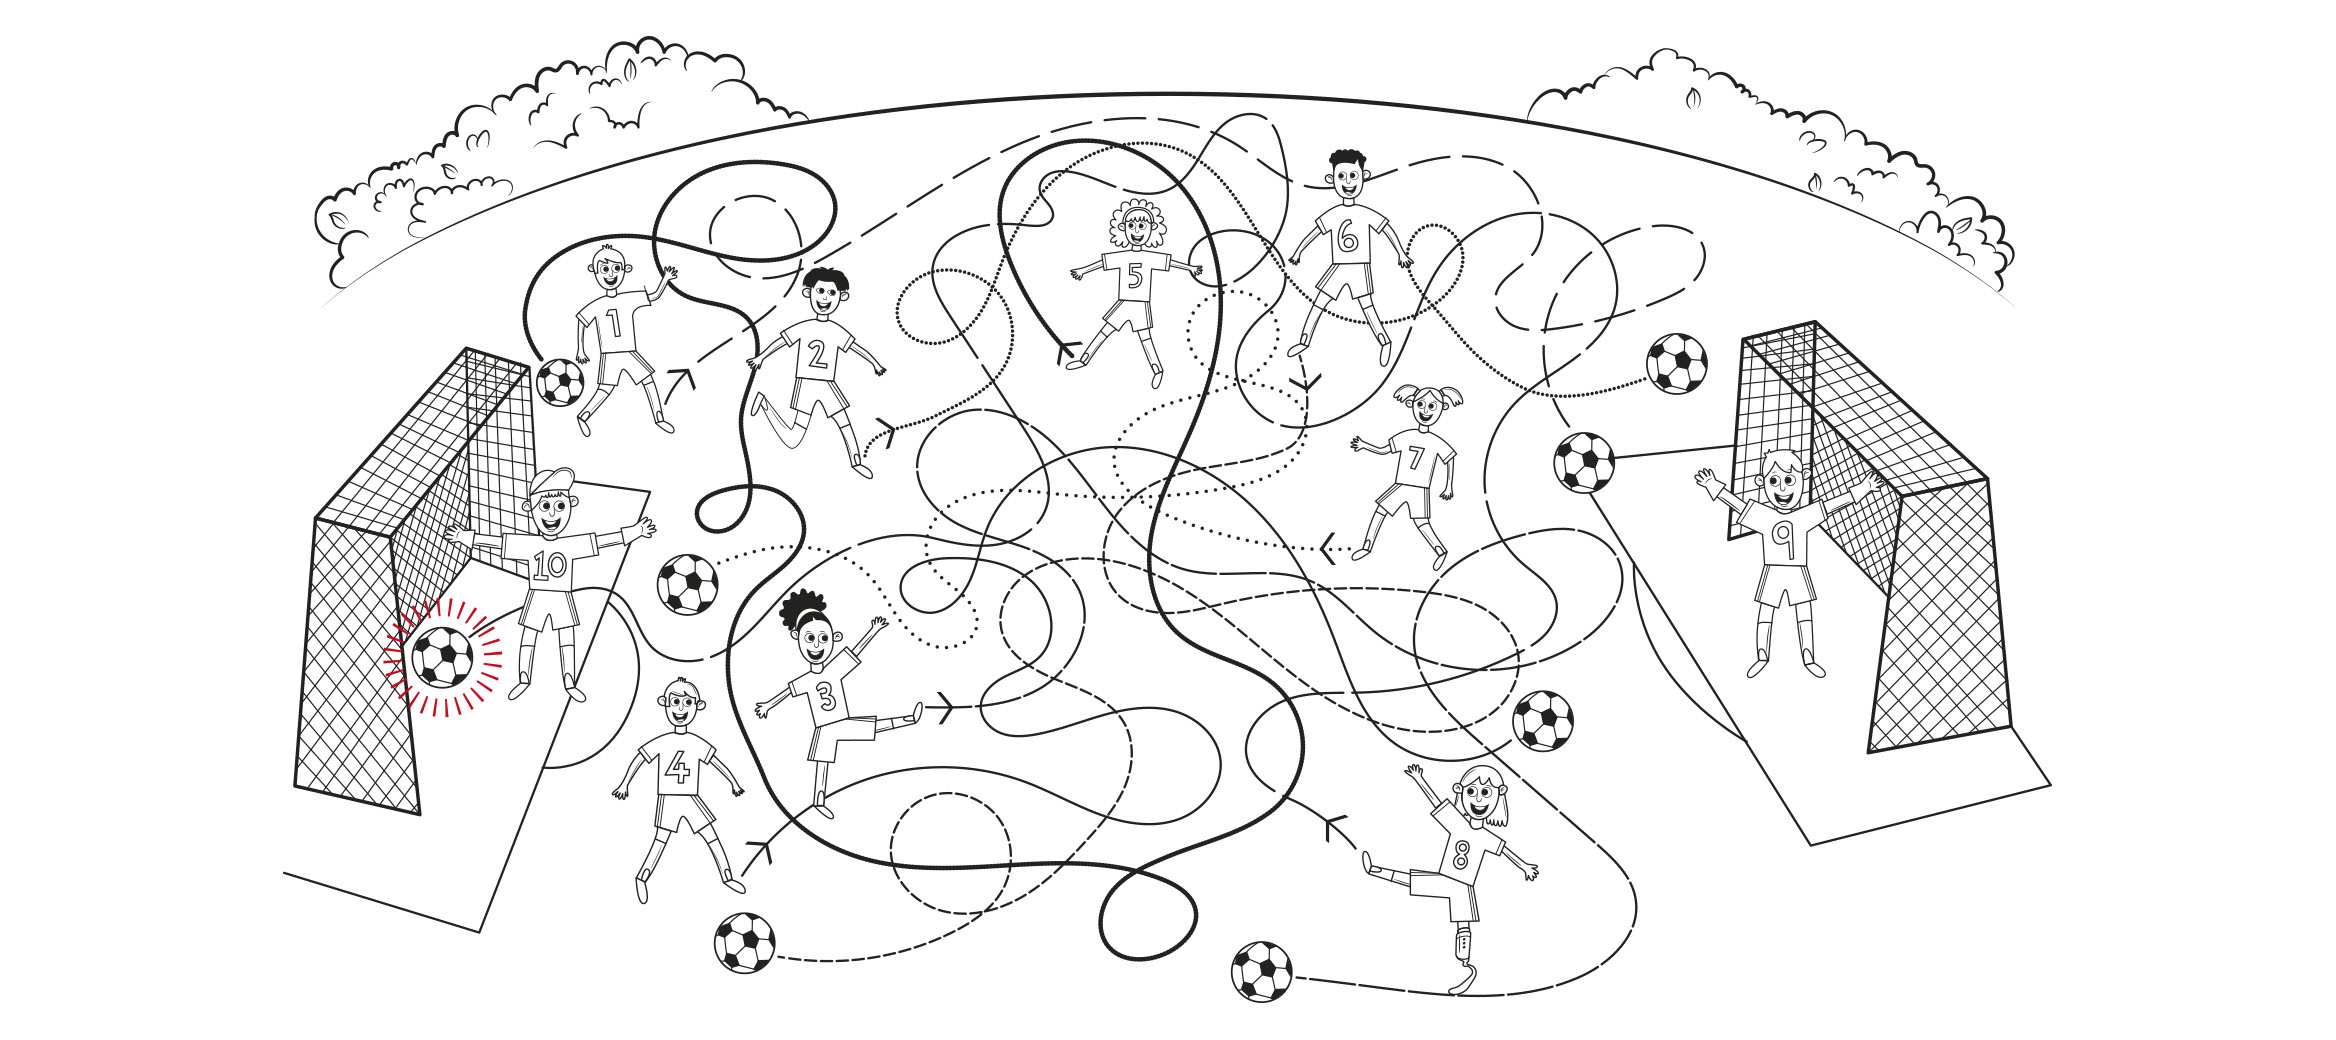 Can your little one work out which player scores the goal by following the squiggly lines?